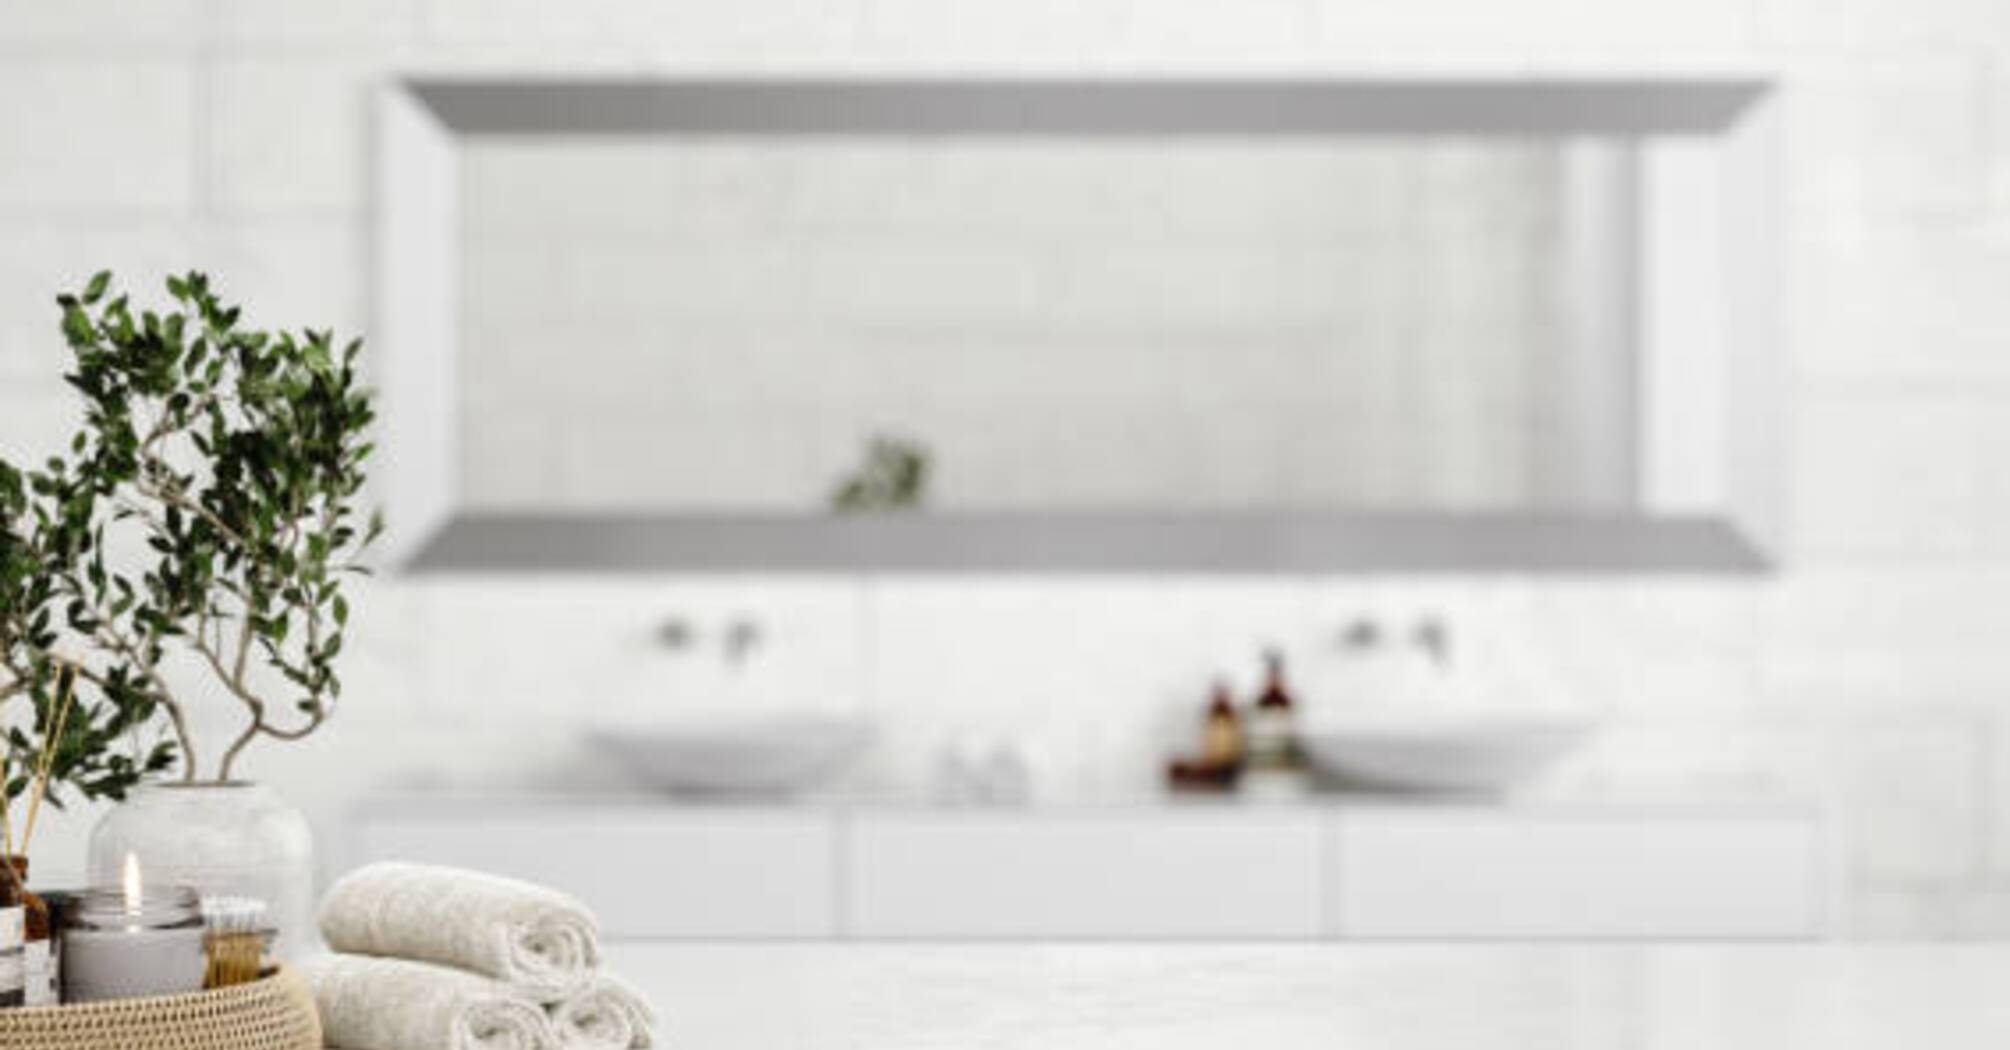 How to keep your bathroom clean: 3 effective bathroom cleanliness tips